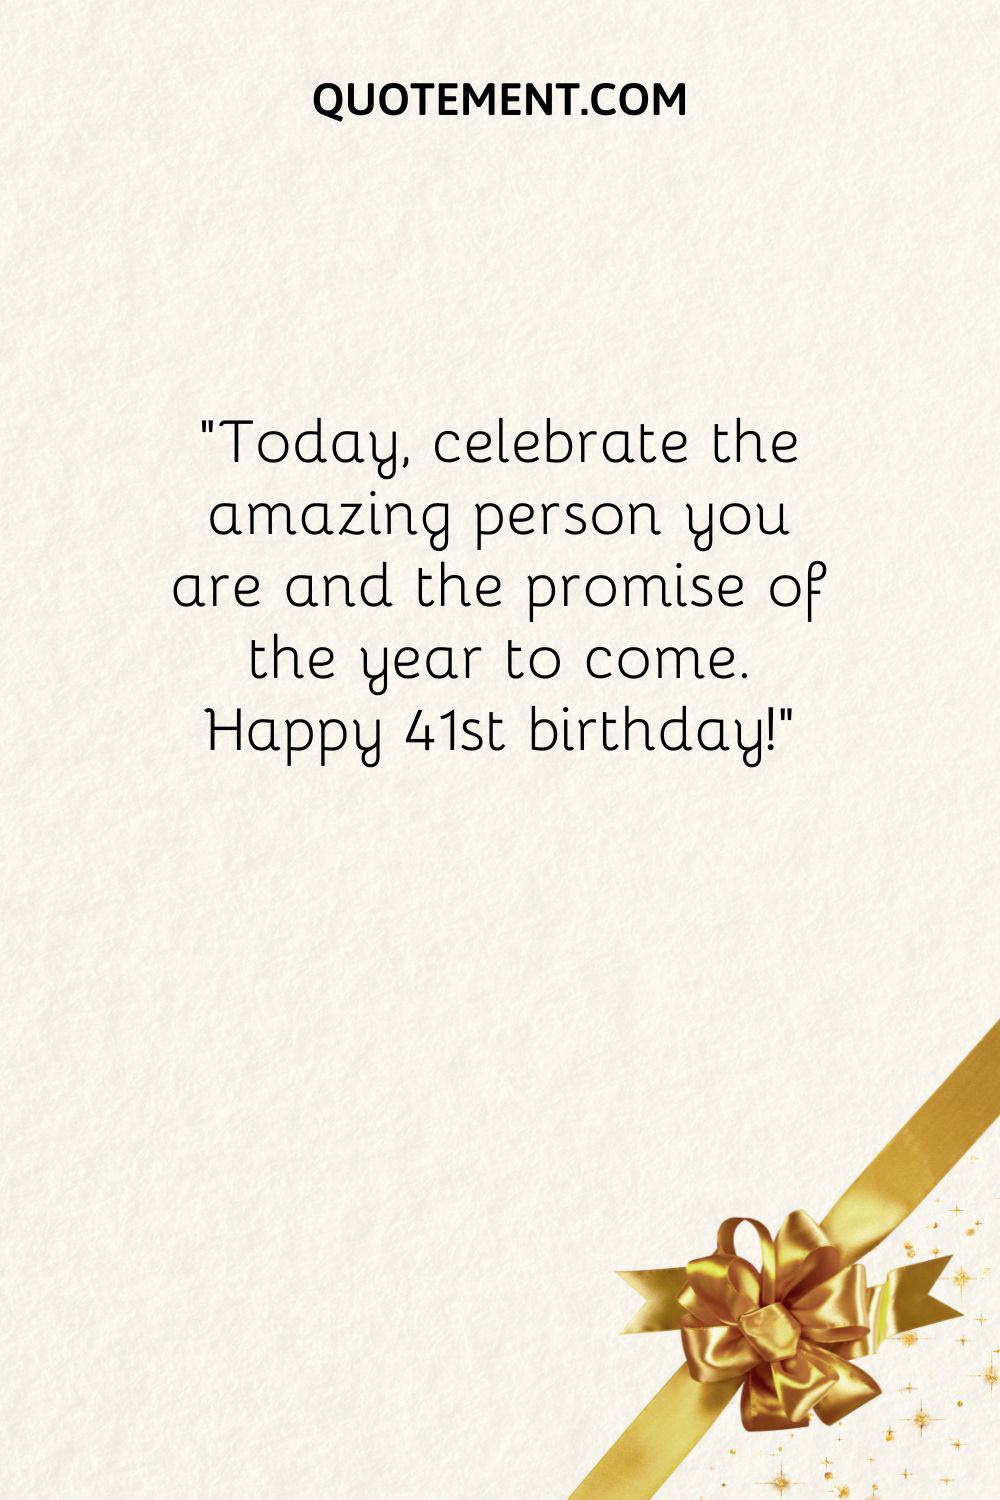 Today, celebrate the amazing person you are and the promise of the year to come. Happy 41st birthday